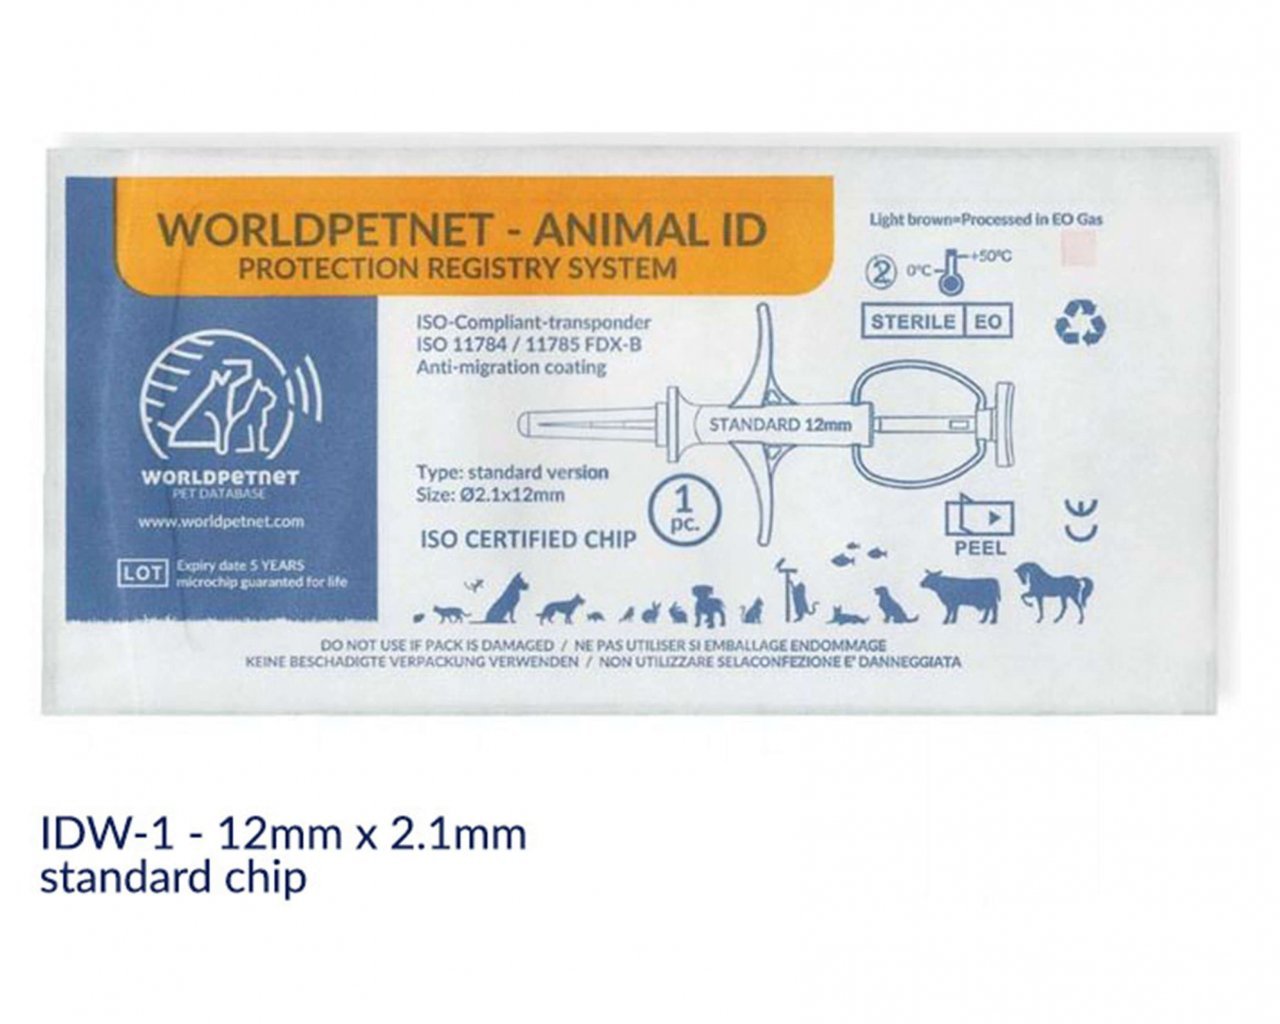 PET MICROCHIP FOR ANIMAL IDW-1 (CODE 900) 12MMX2.1MM STANDARD - microchip for dog, animals, pet identification reader #13